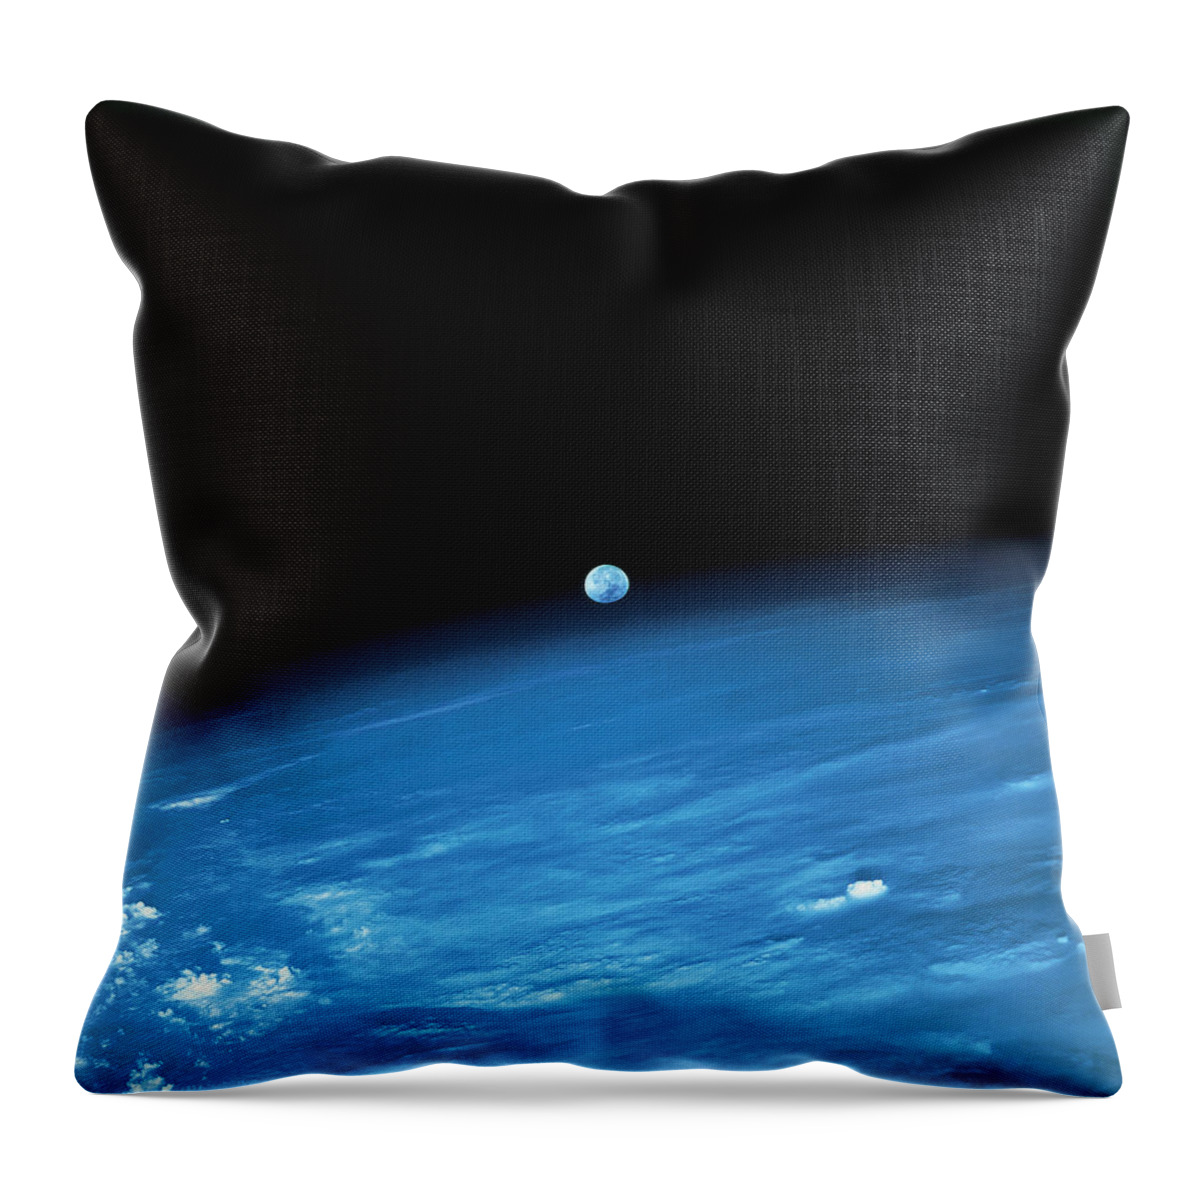 Globe Throw Pillow featuring the photograph Space And The Earth by Stockbyte